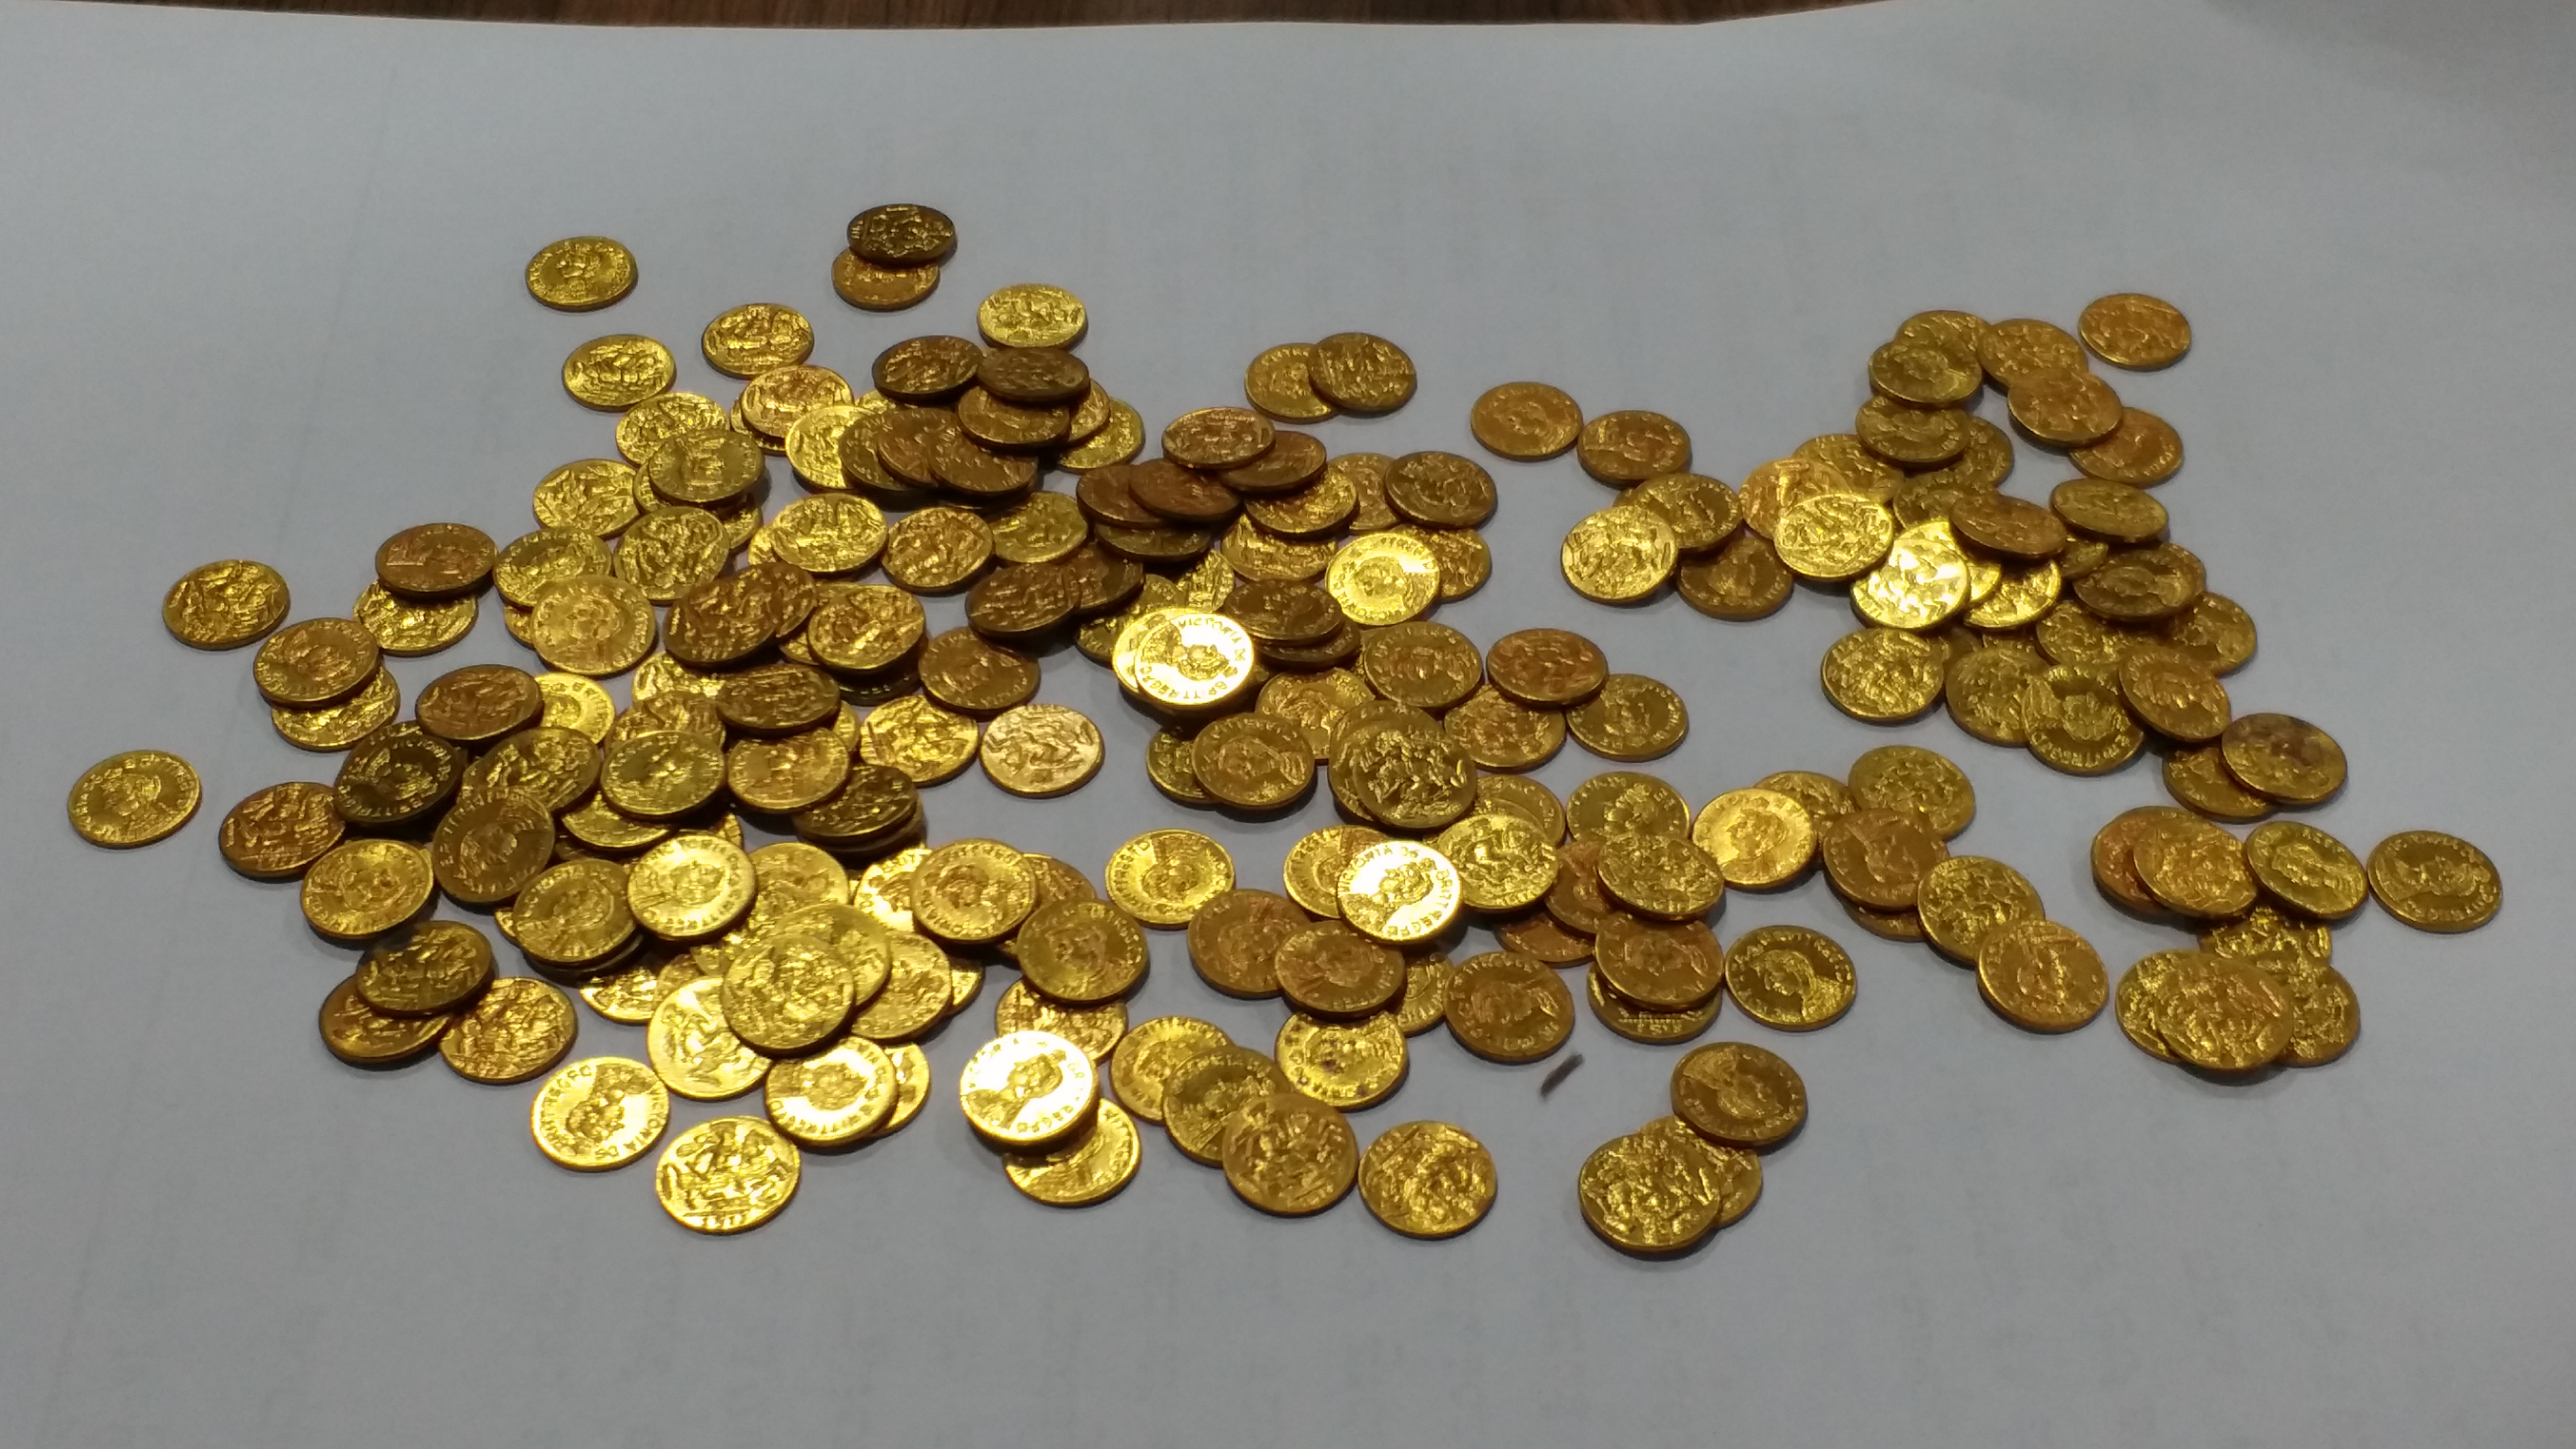 30 lakh rupees Cheated by giving fake gold coins in Davanagere: One person was arrested